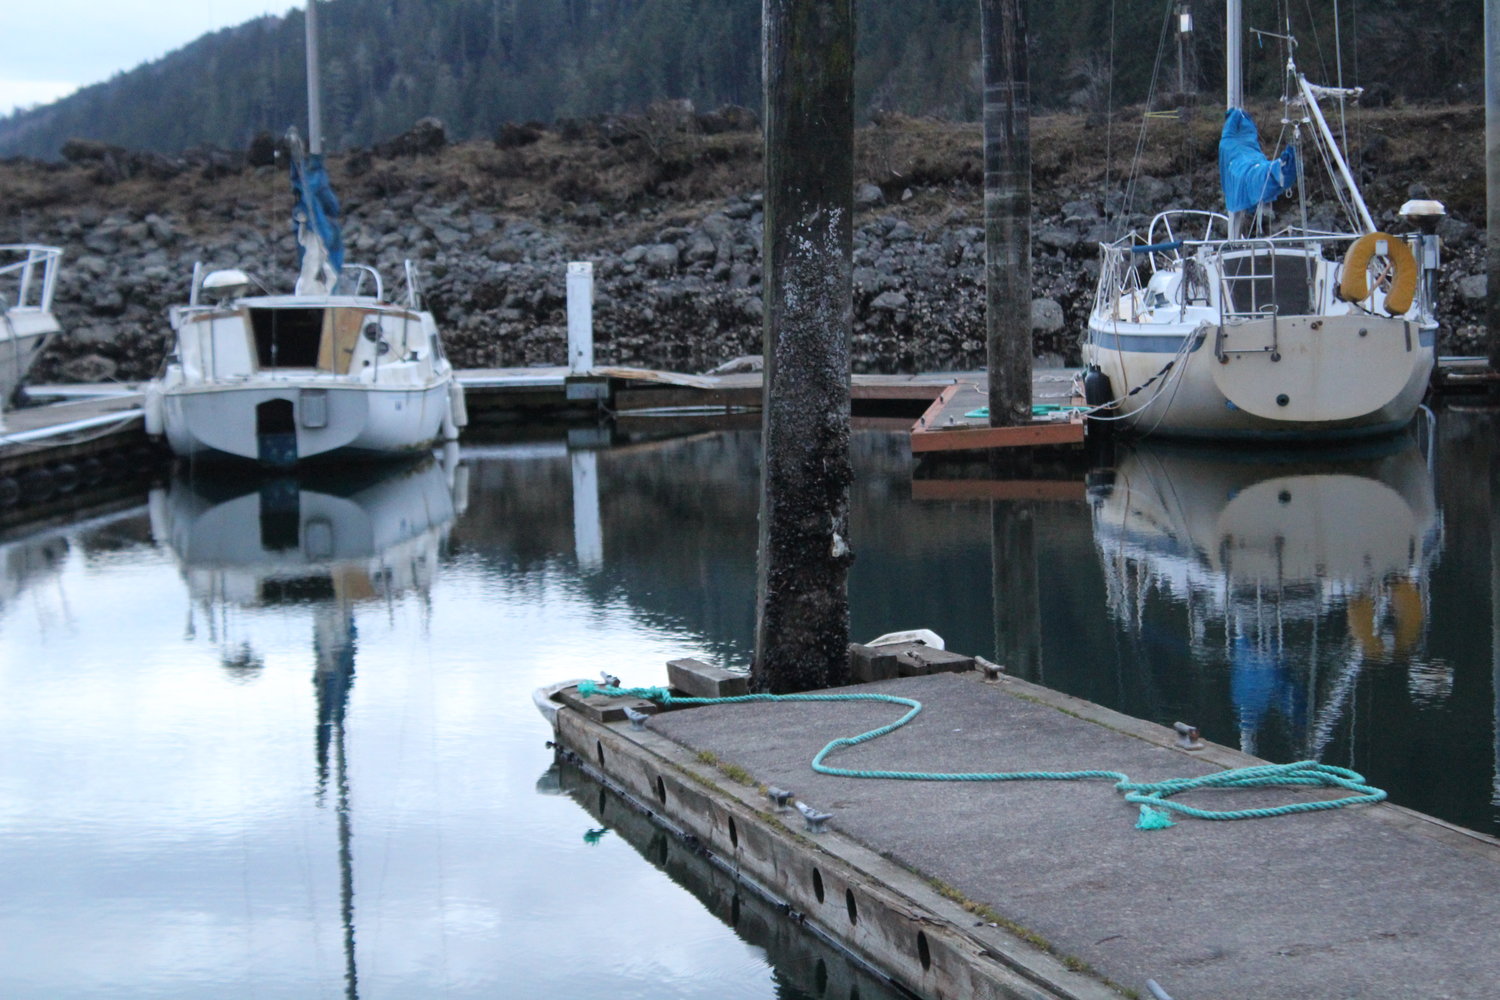 The port recently received recognition for its efforts to keep the Herb Beck Marina in Quilcene clean.